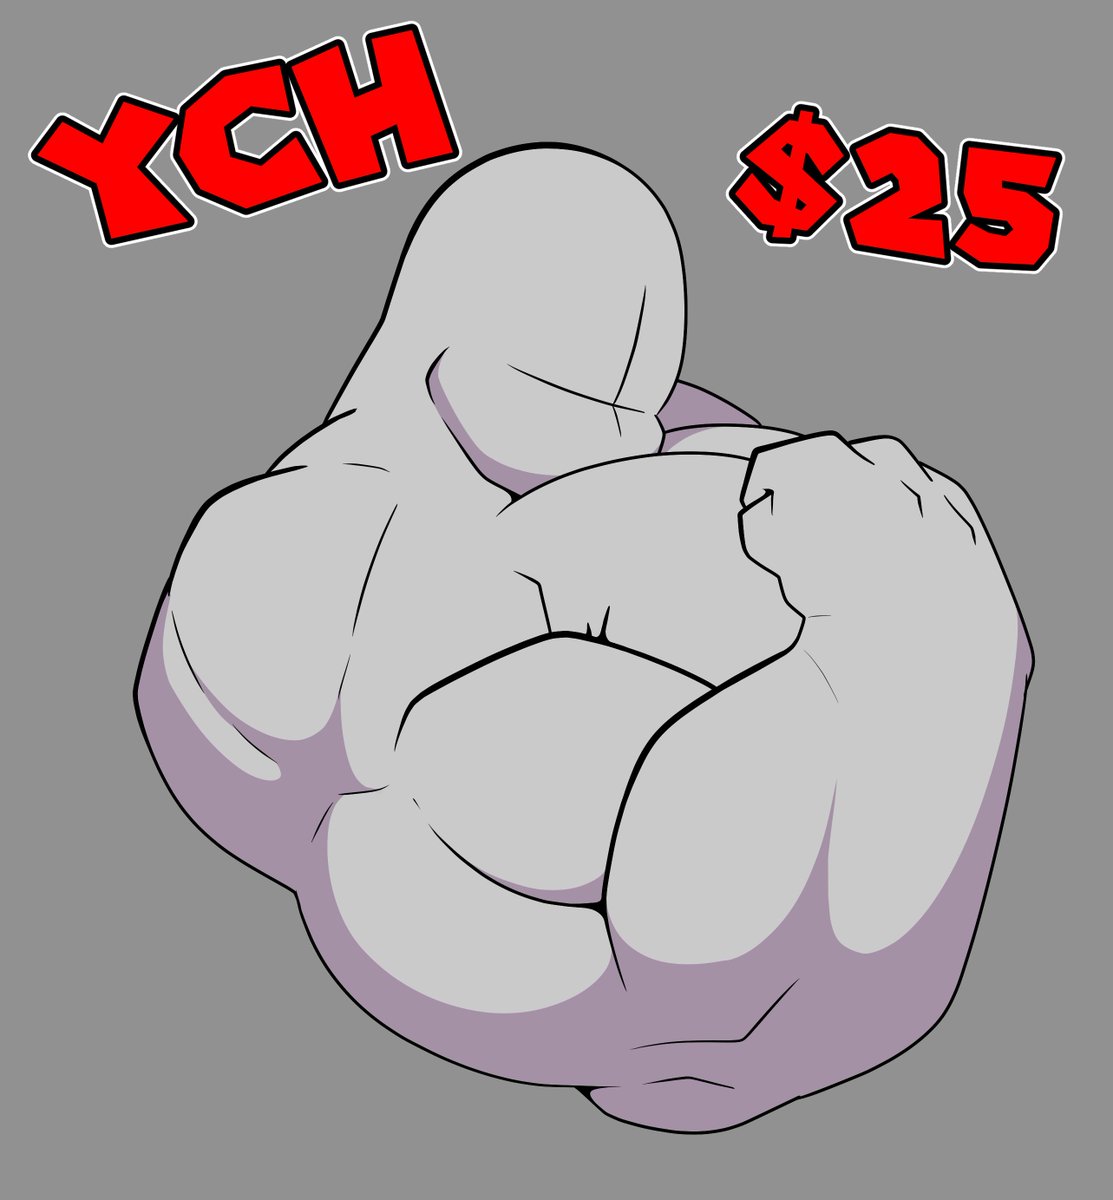 Yep I am opening it up again for those that missed out! 5 slots like last time so if you want one, DM me! This isn't limited to just your character, can be any character as long as I am ok with doing it, don't be afraid to ask^^